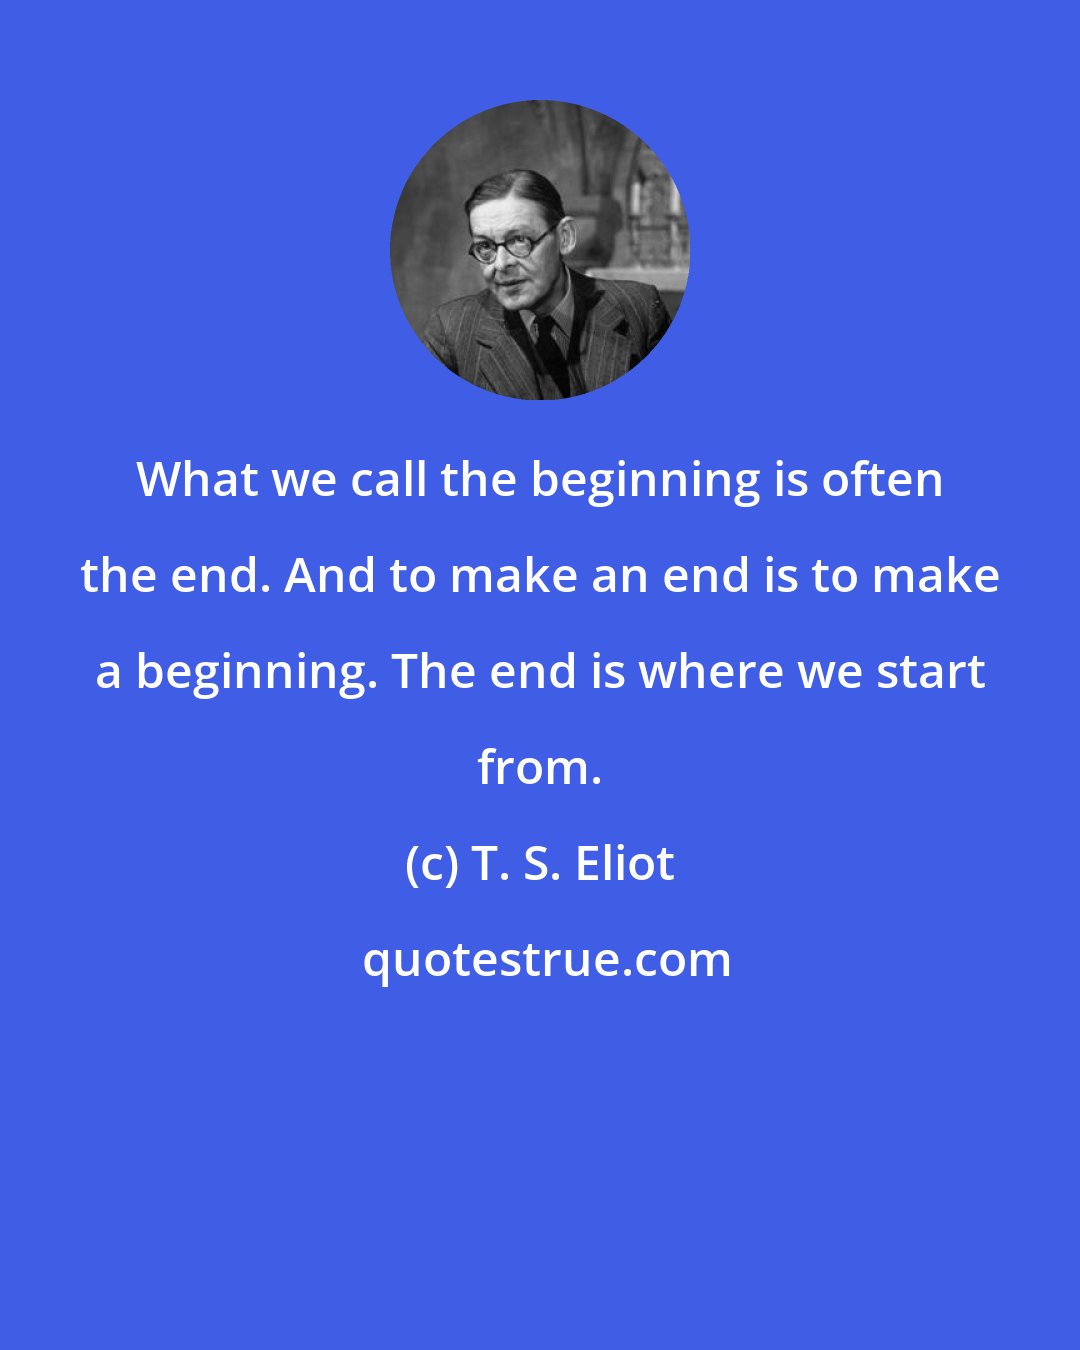 T. S. Eliot: What we call the beginning is often the end. And to make an end is to make a beginning. The end is where we start from.